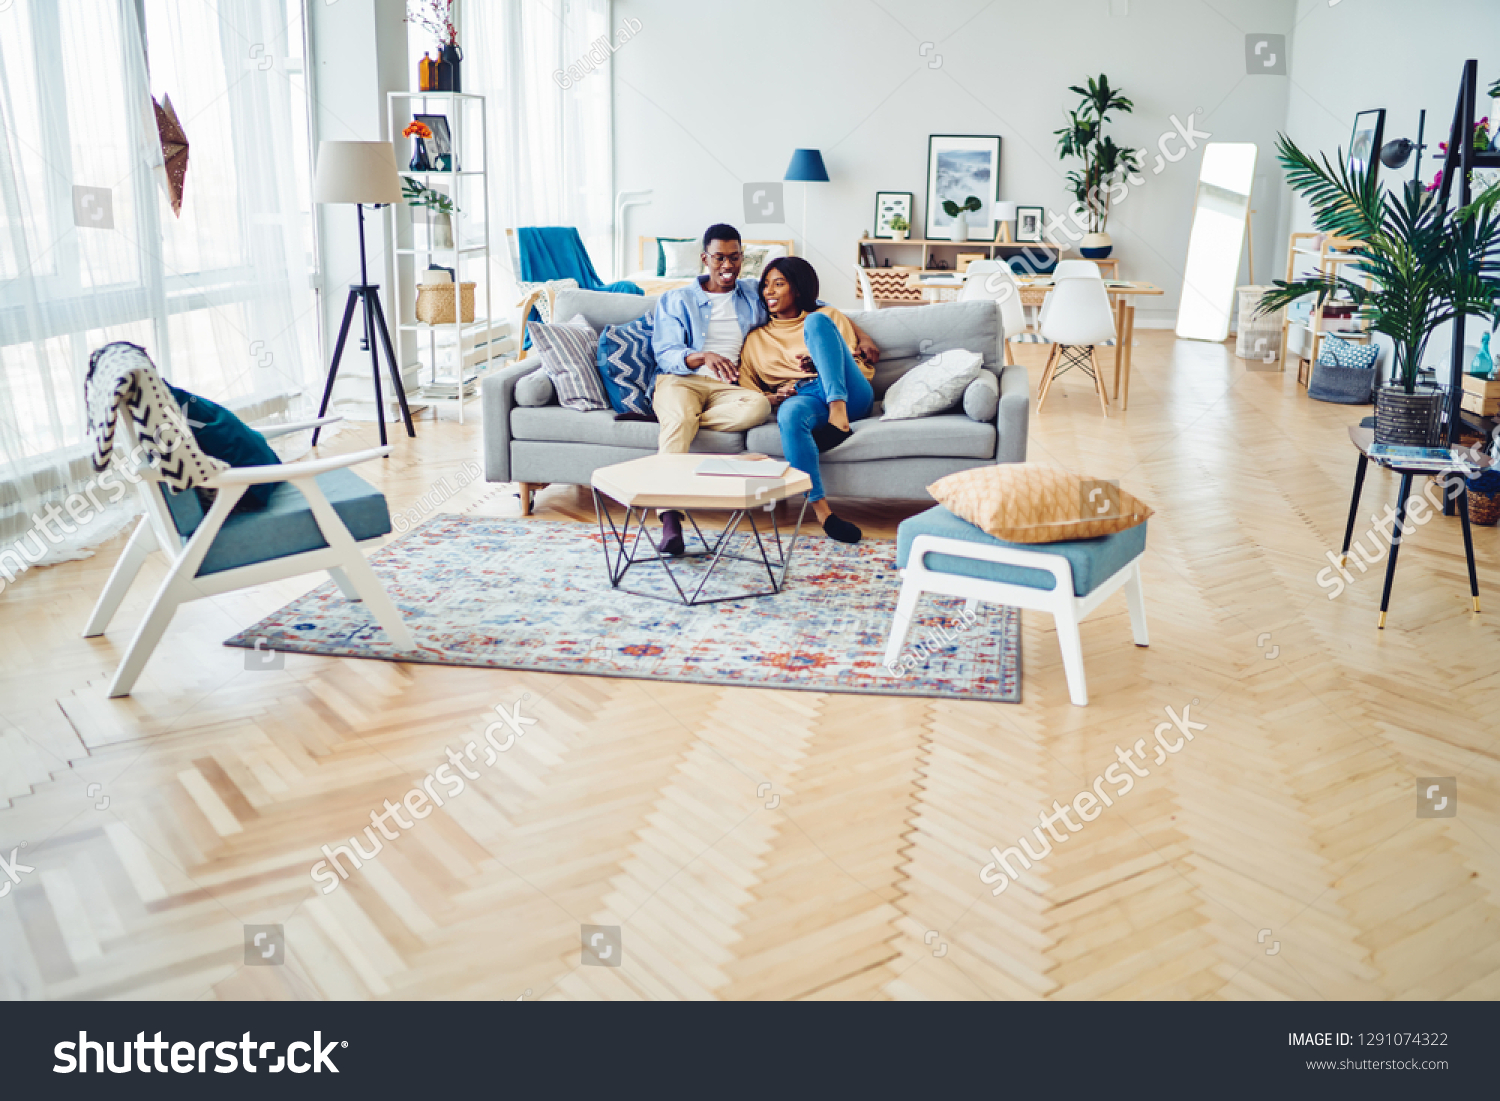 Happy African American Young Family Sitting Stock Photo Edit Now 1291074322